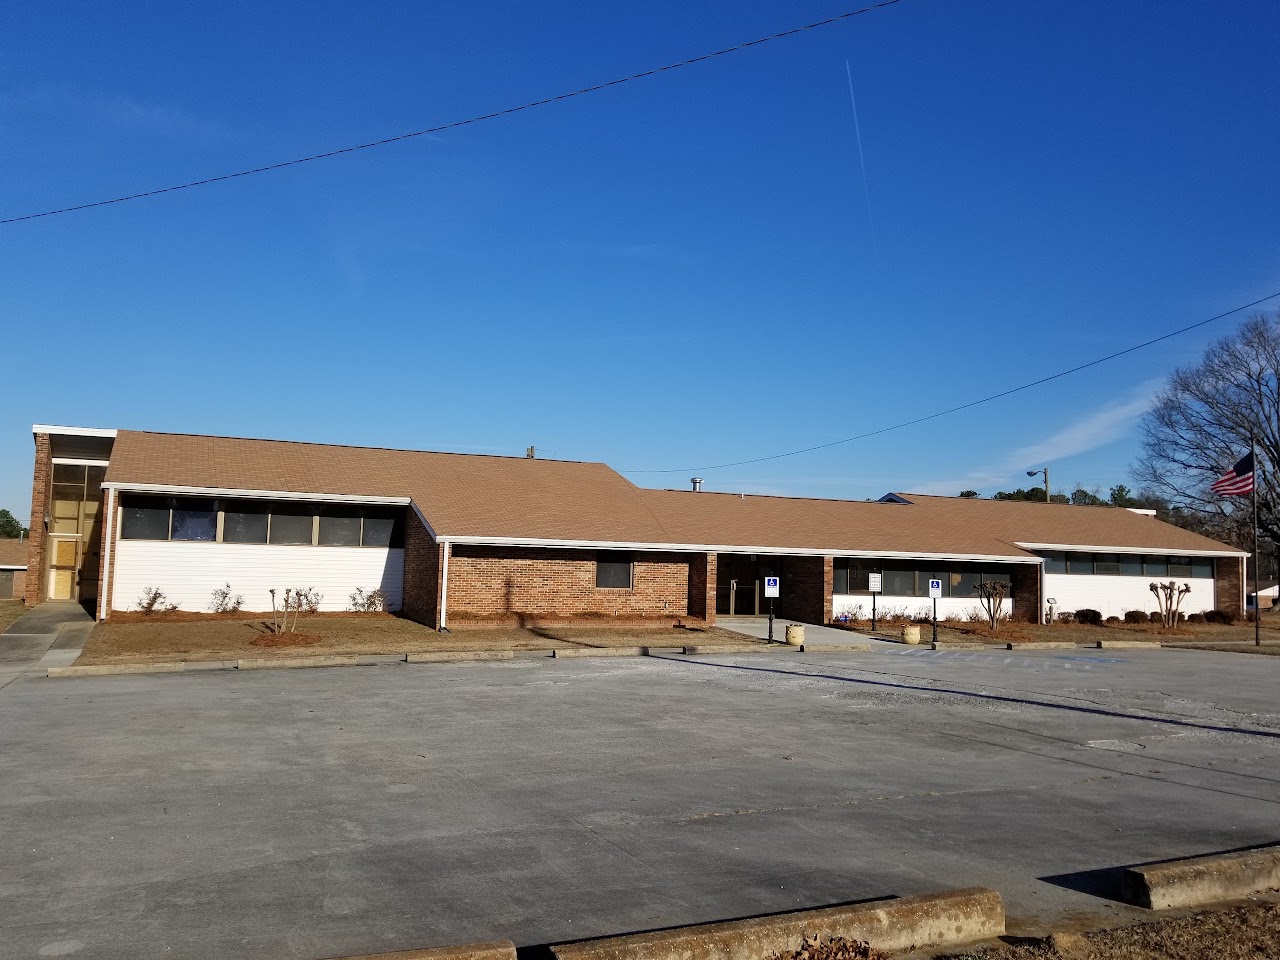 Photo of Housing Authority of the City of Thomson at 219 PECAN Avenue THOMSON, GA 30824